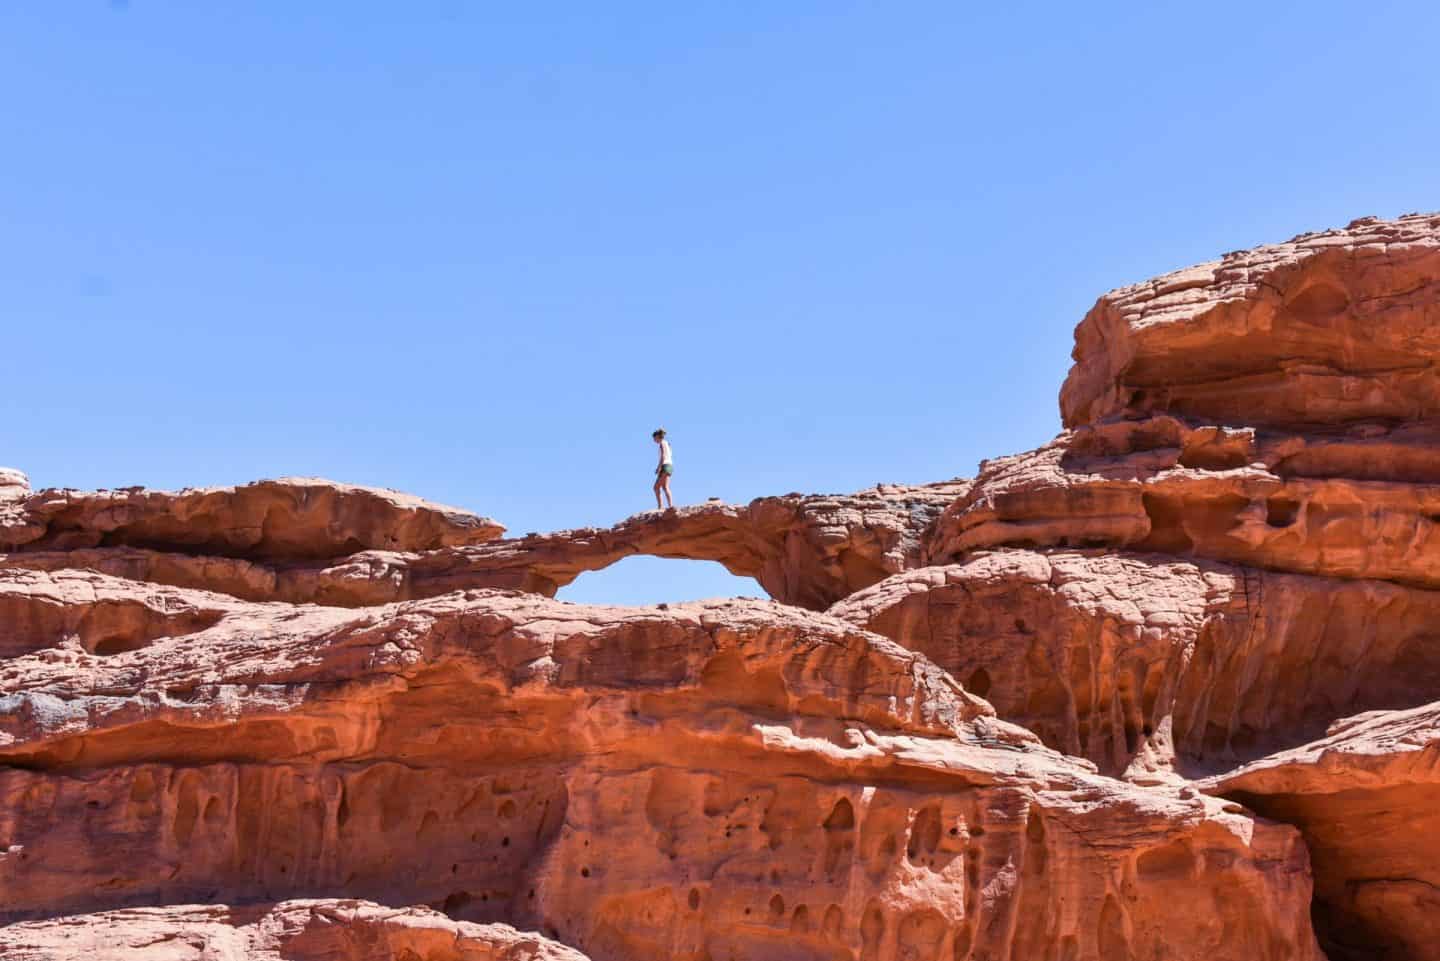 Attractions to see in Wadi Rum